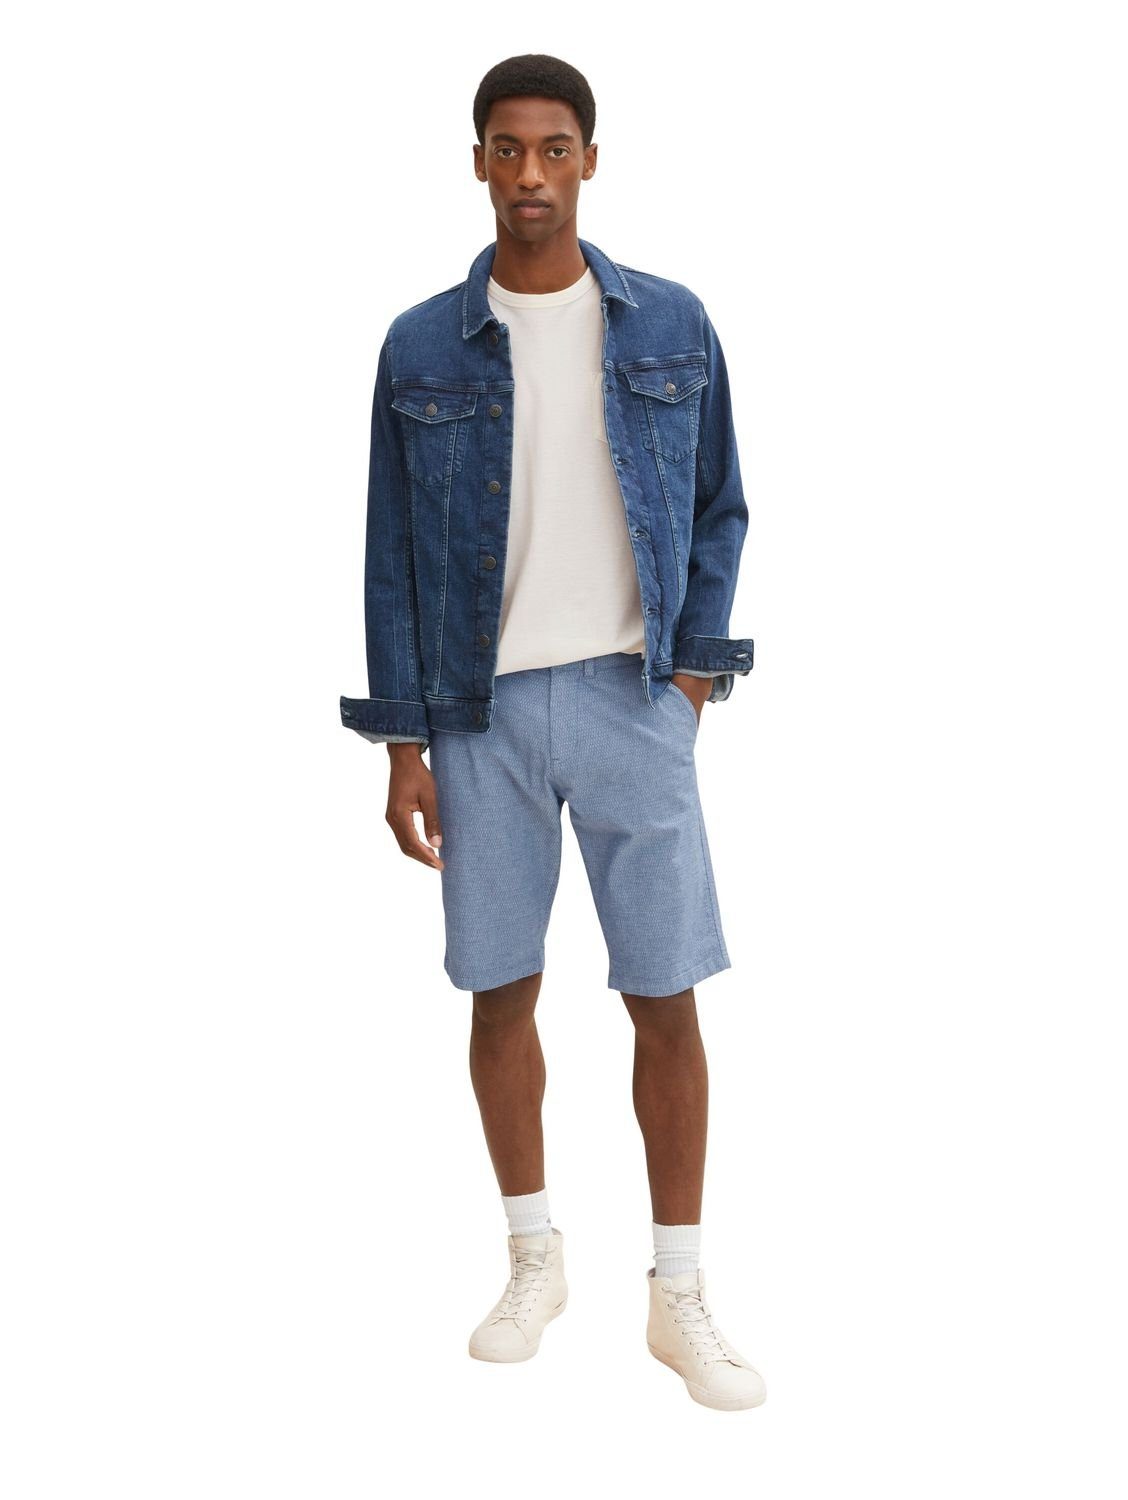 Dobby STRUCTURED Look TOM TAILOR 29300 Chambray mit Shorts Stretch